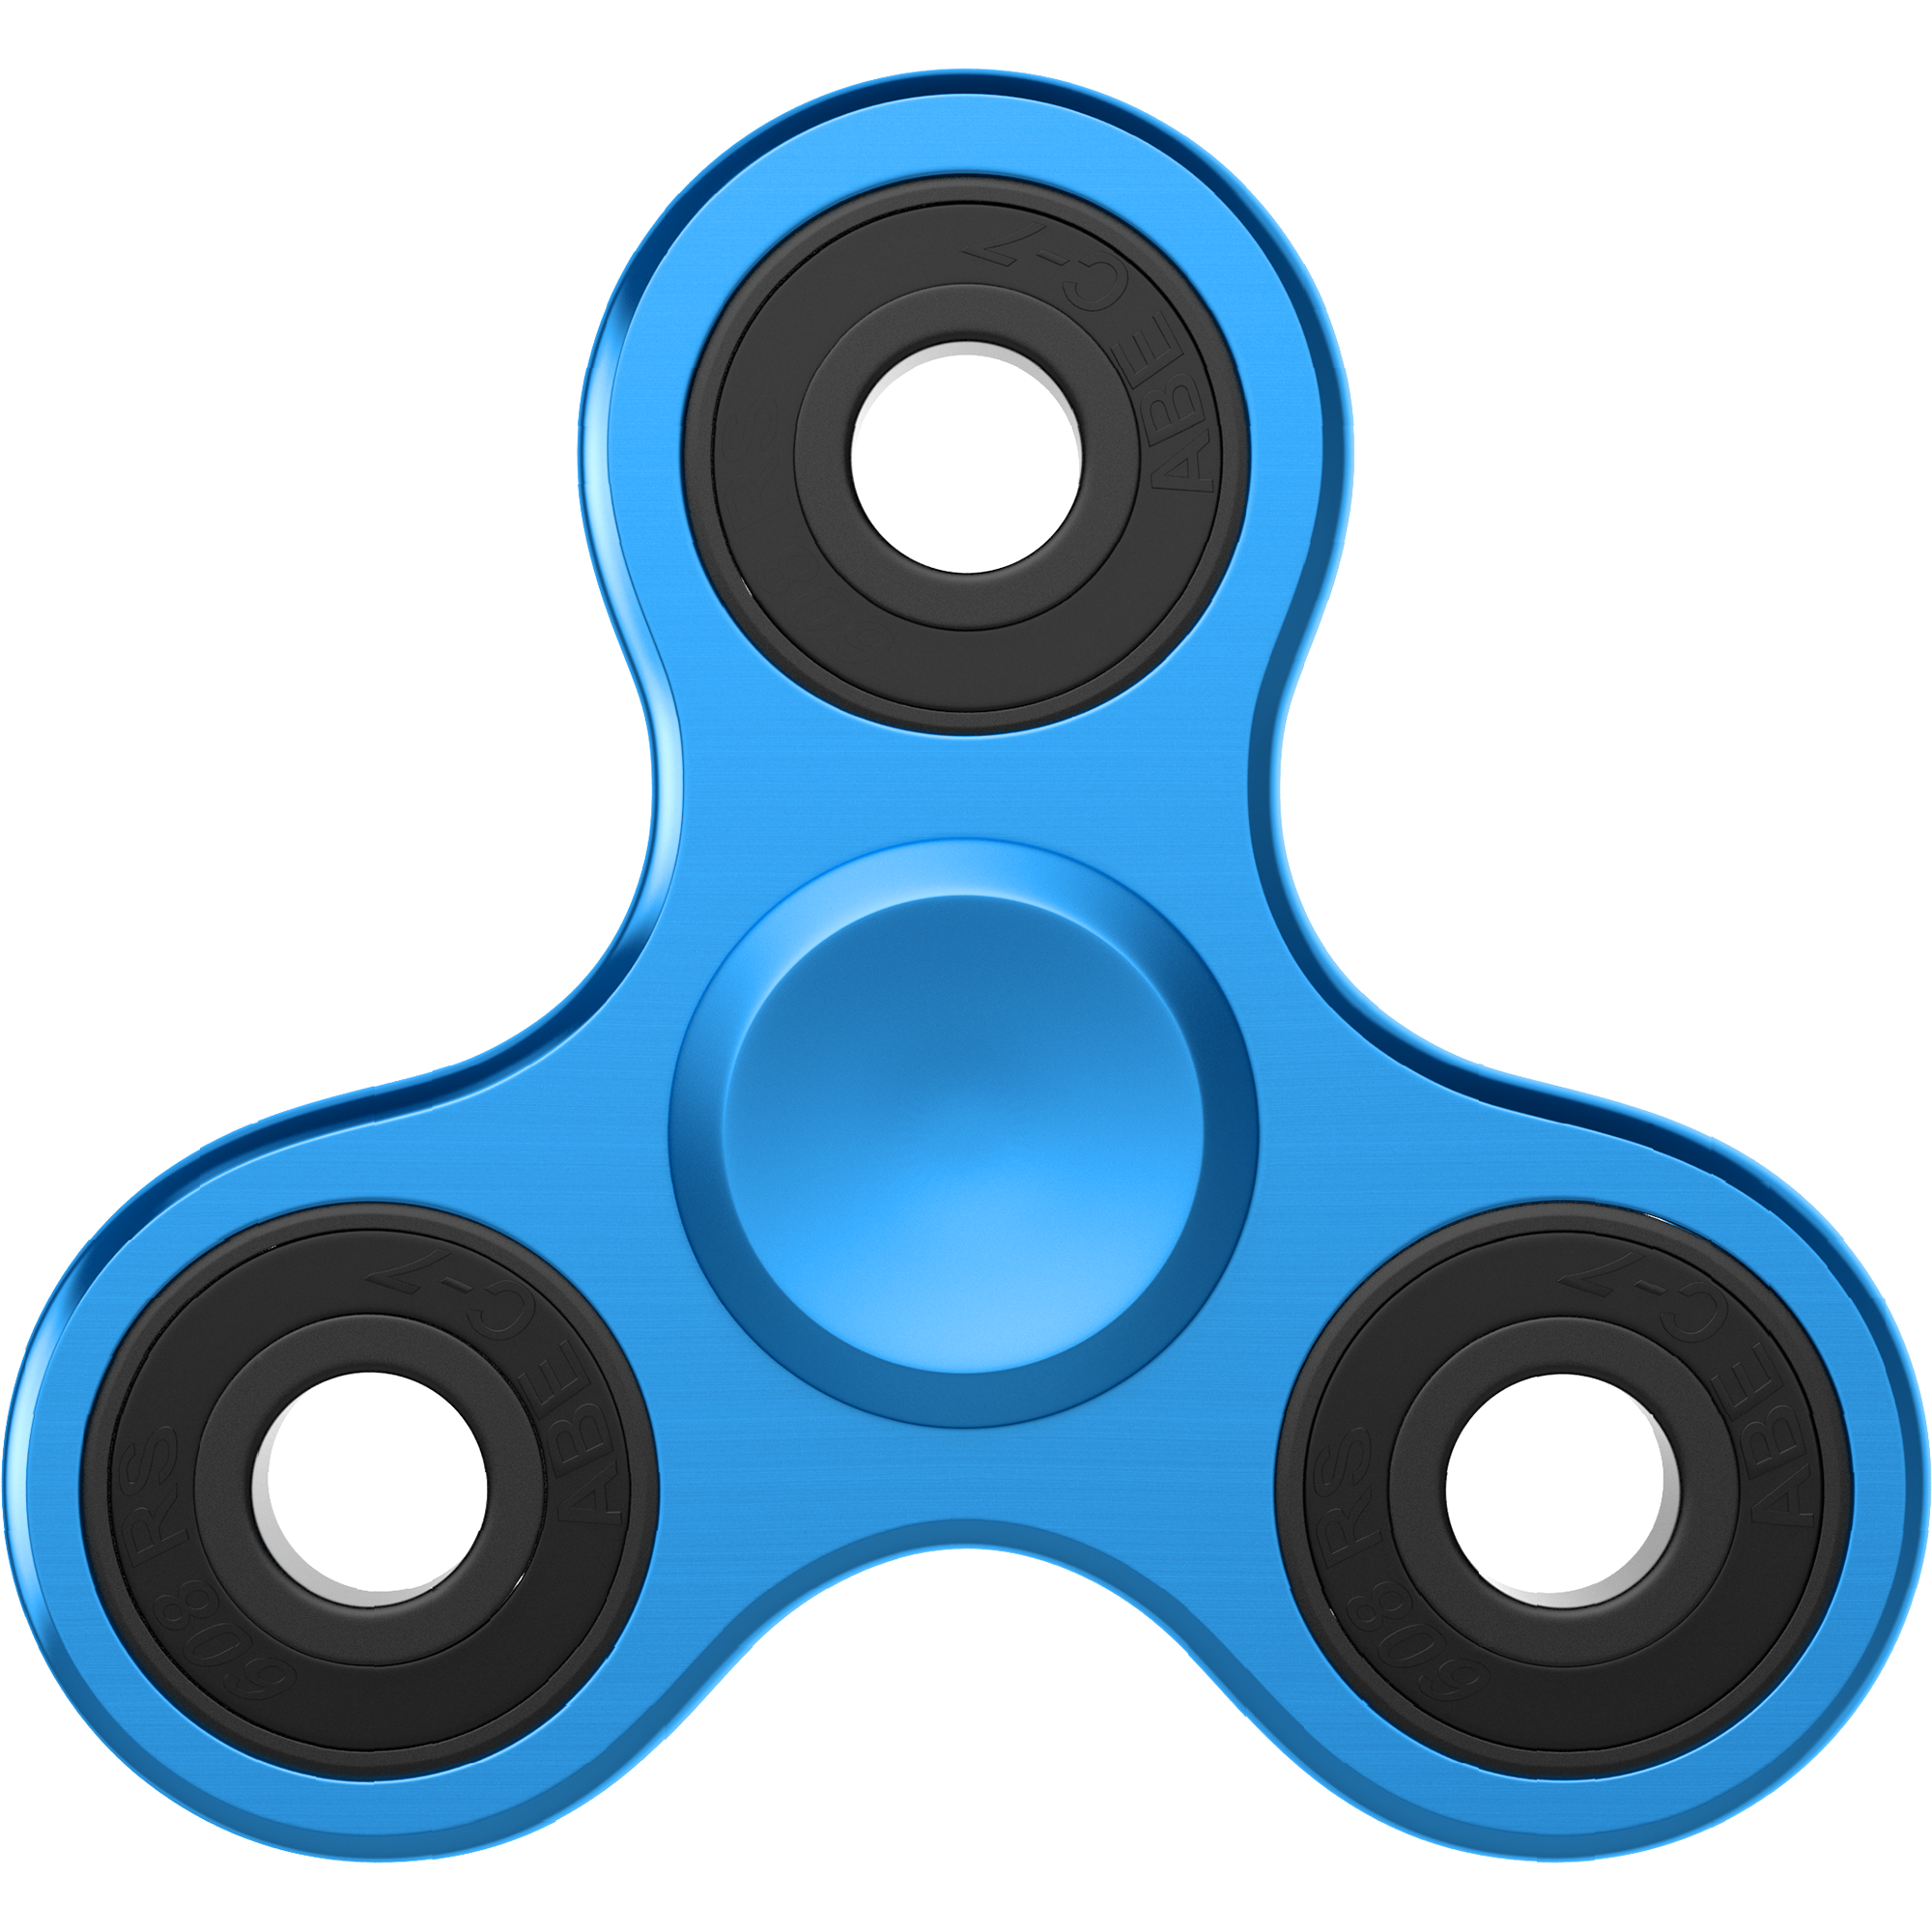 Alloy Blue 360 Spinner Focus Fidget Toy Tri-Spinner Focus Toy for Kids & Adults - image 1 of 5